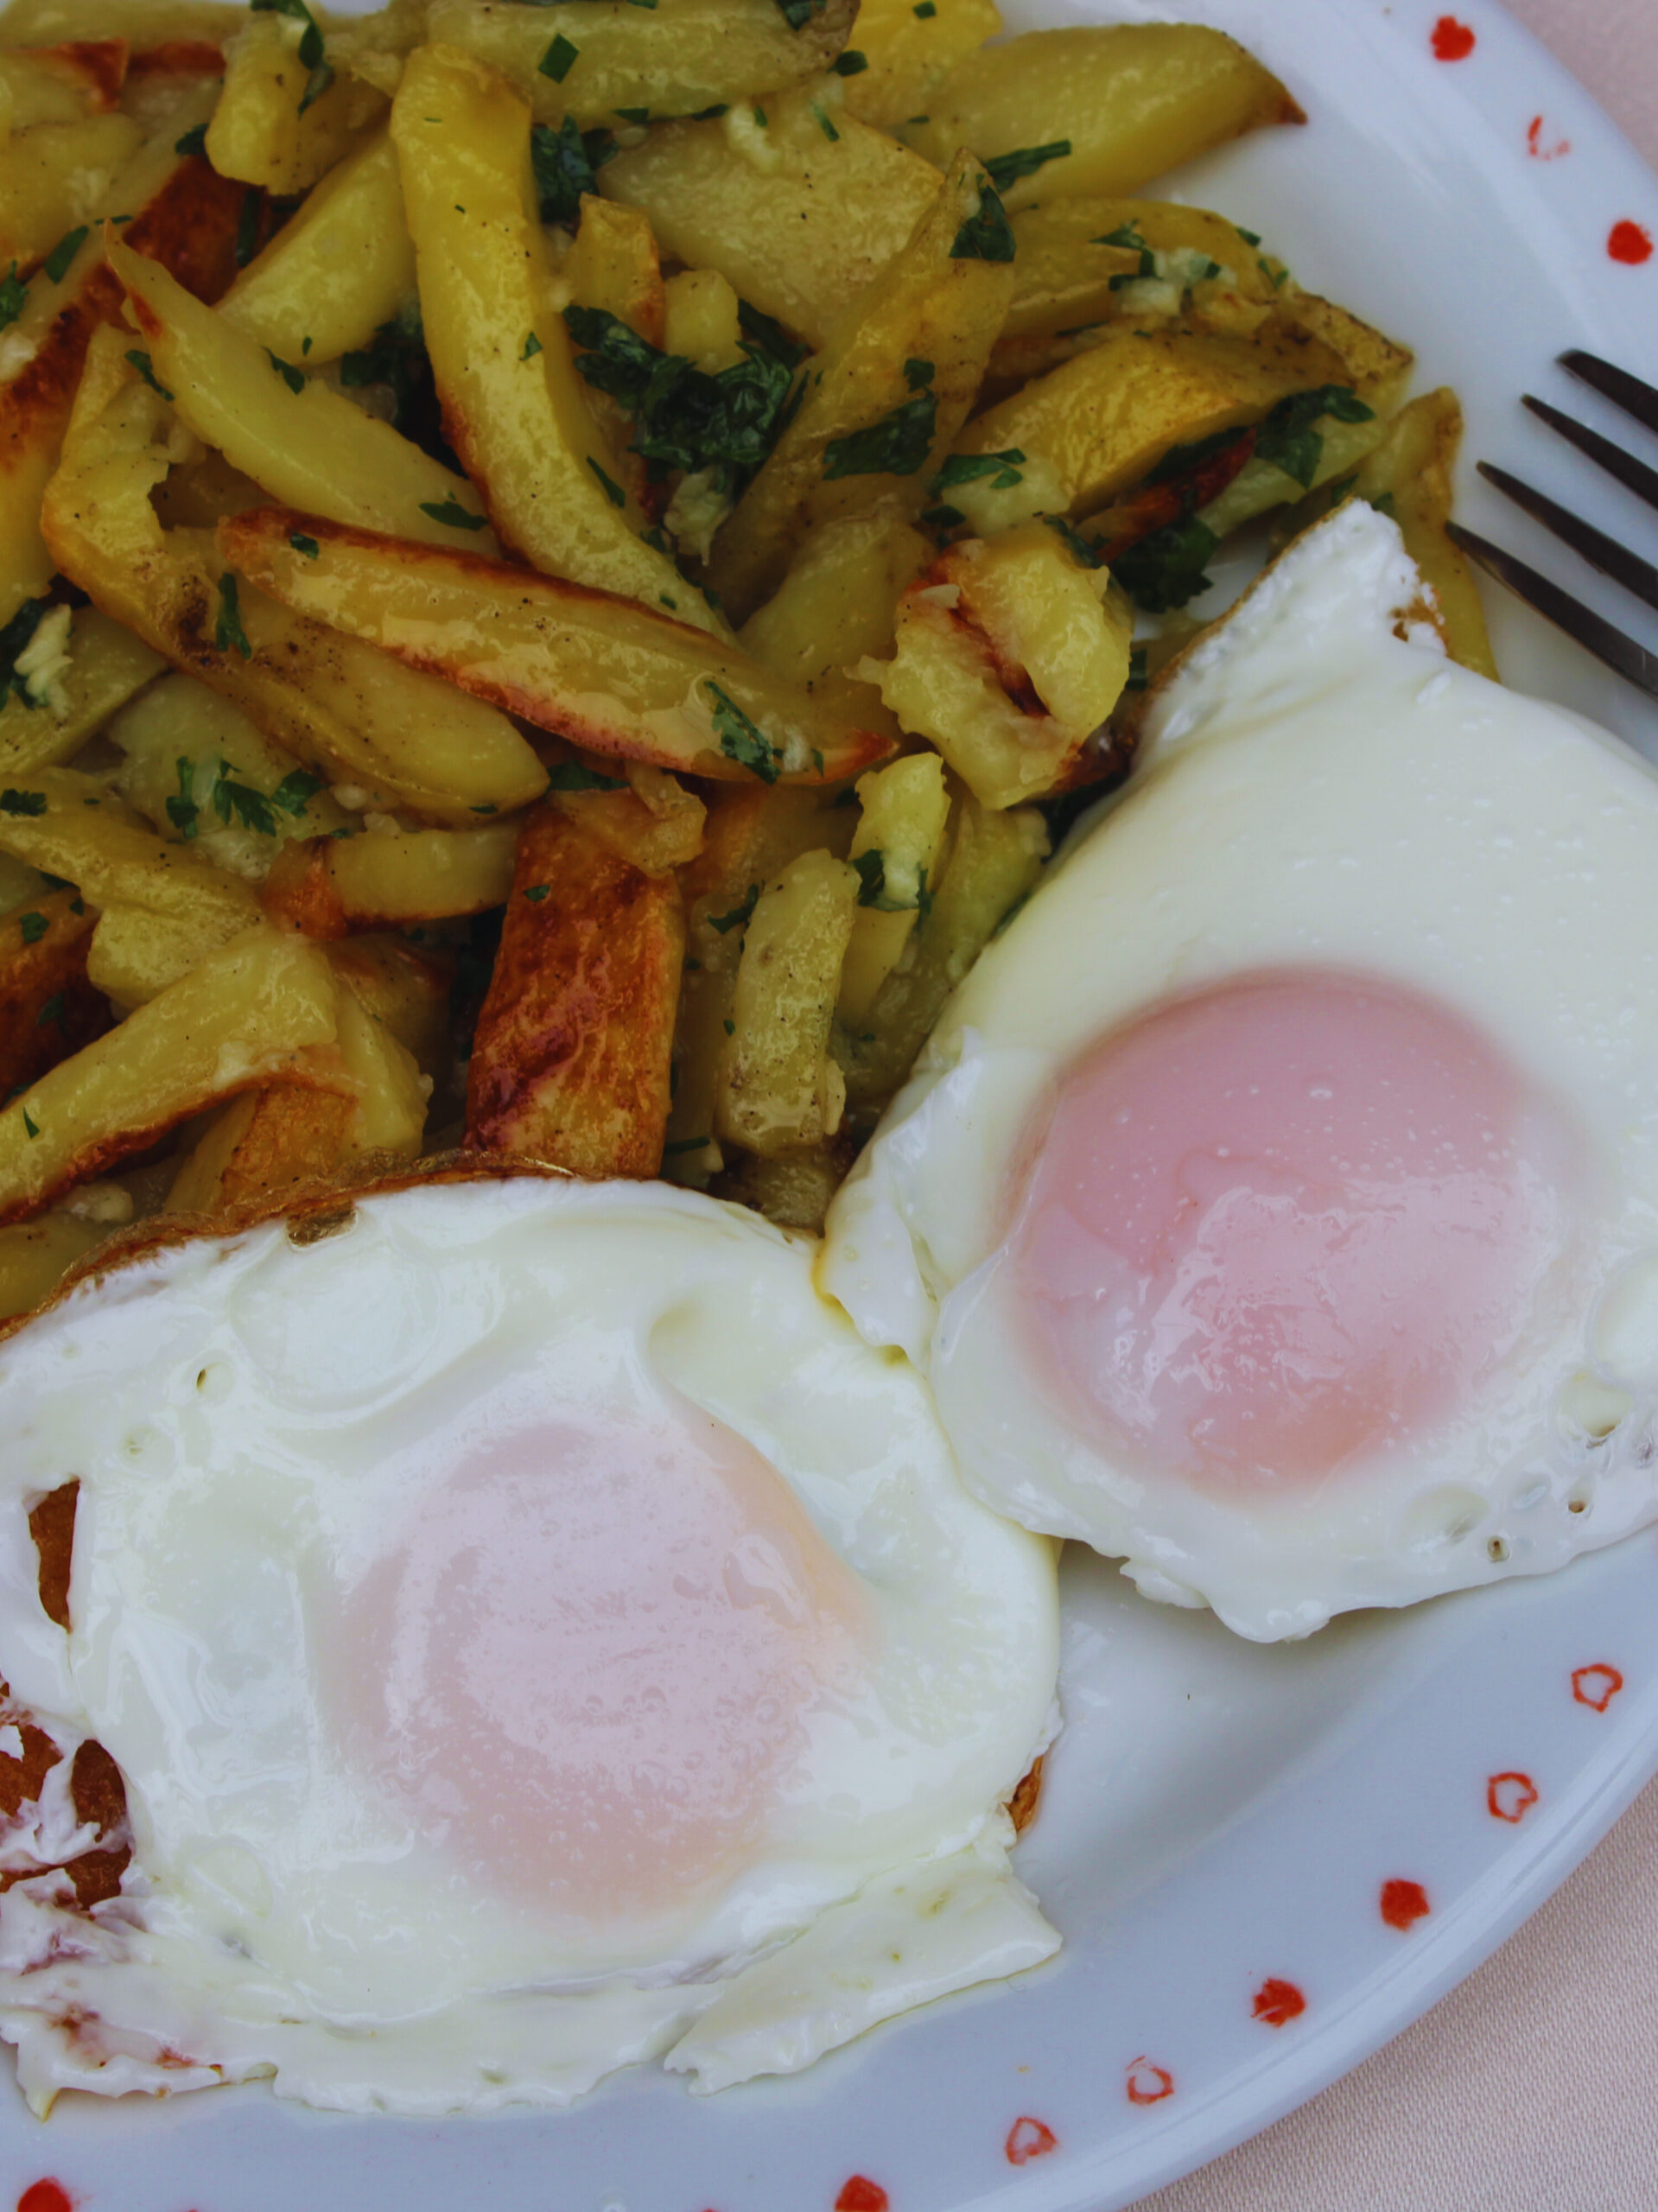 Fried eggs and Garlicky fries.